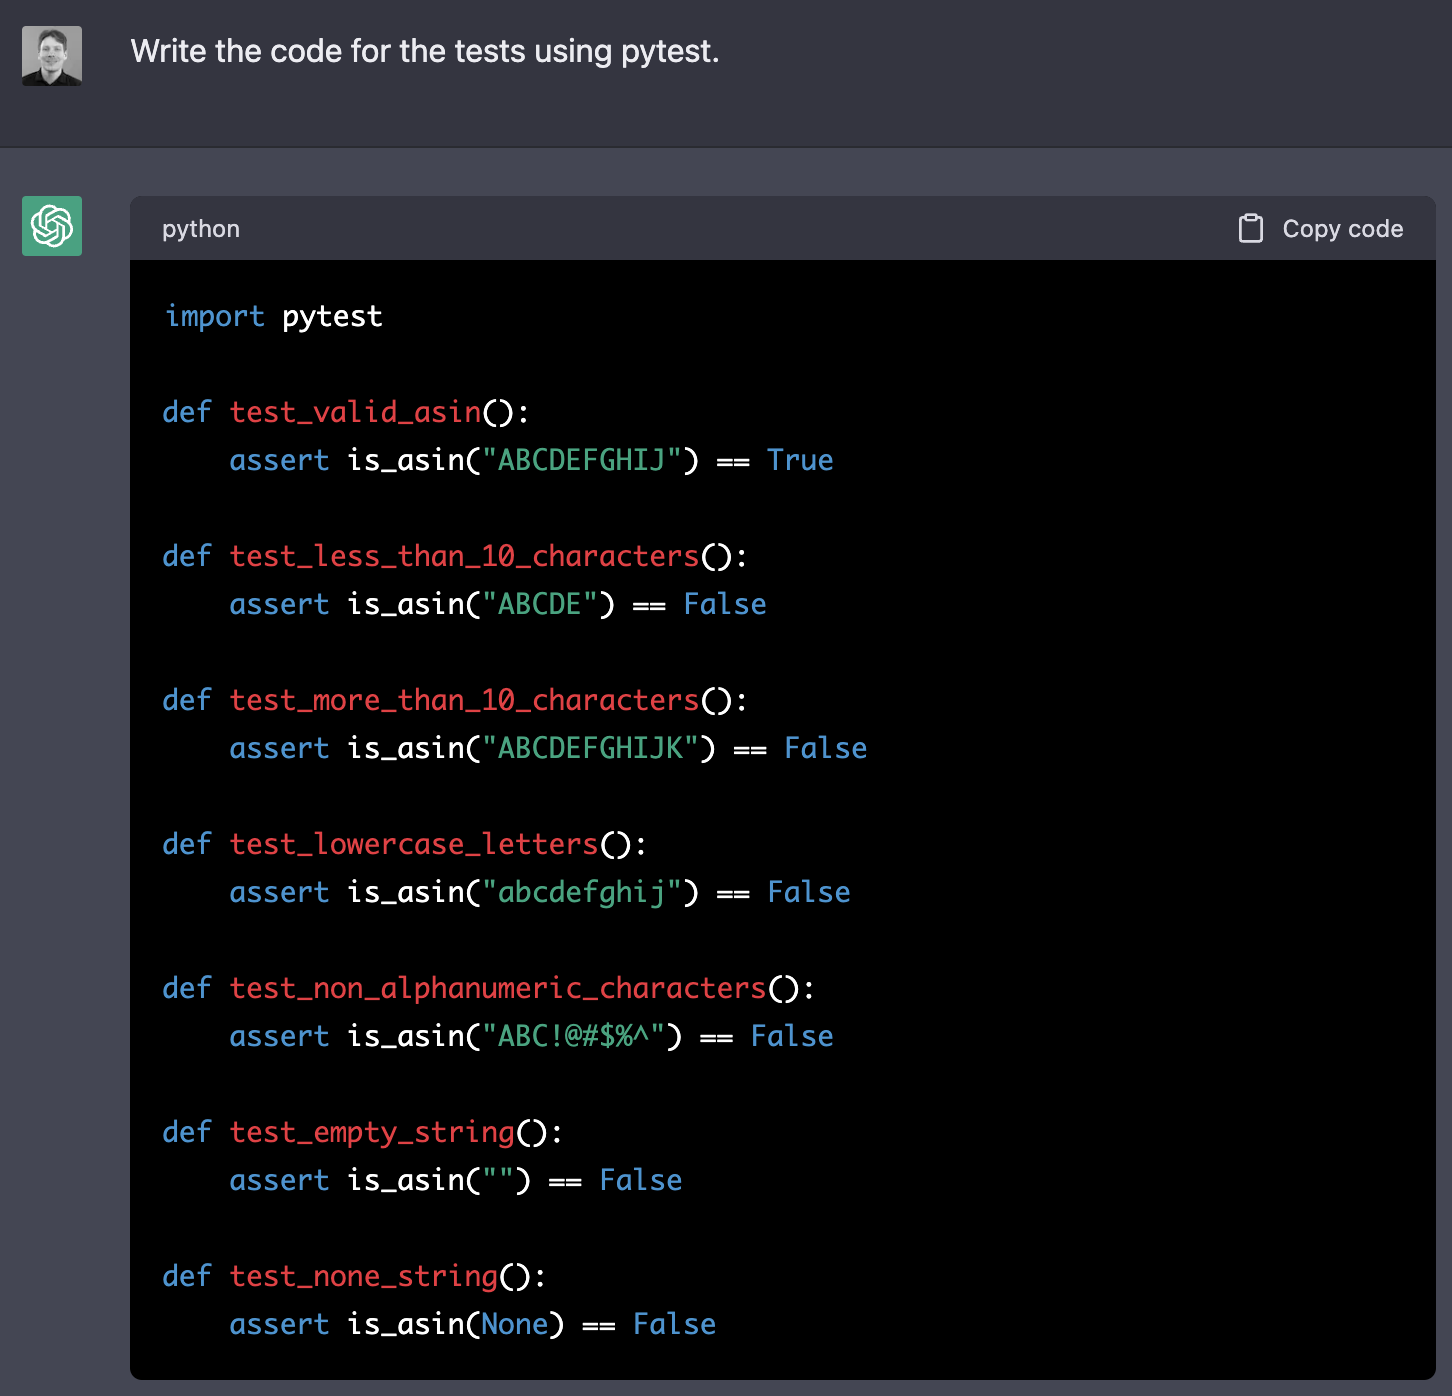 ChatGPT > Write the code for the tests using pytest.